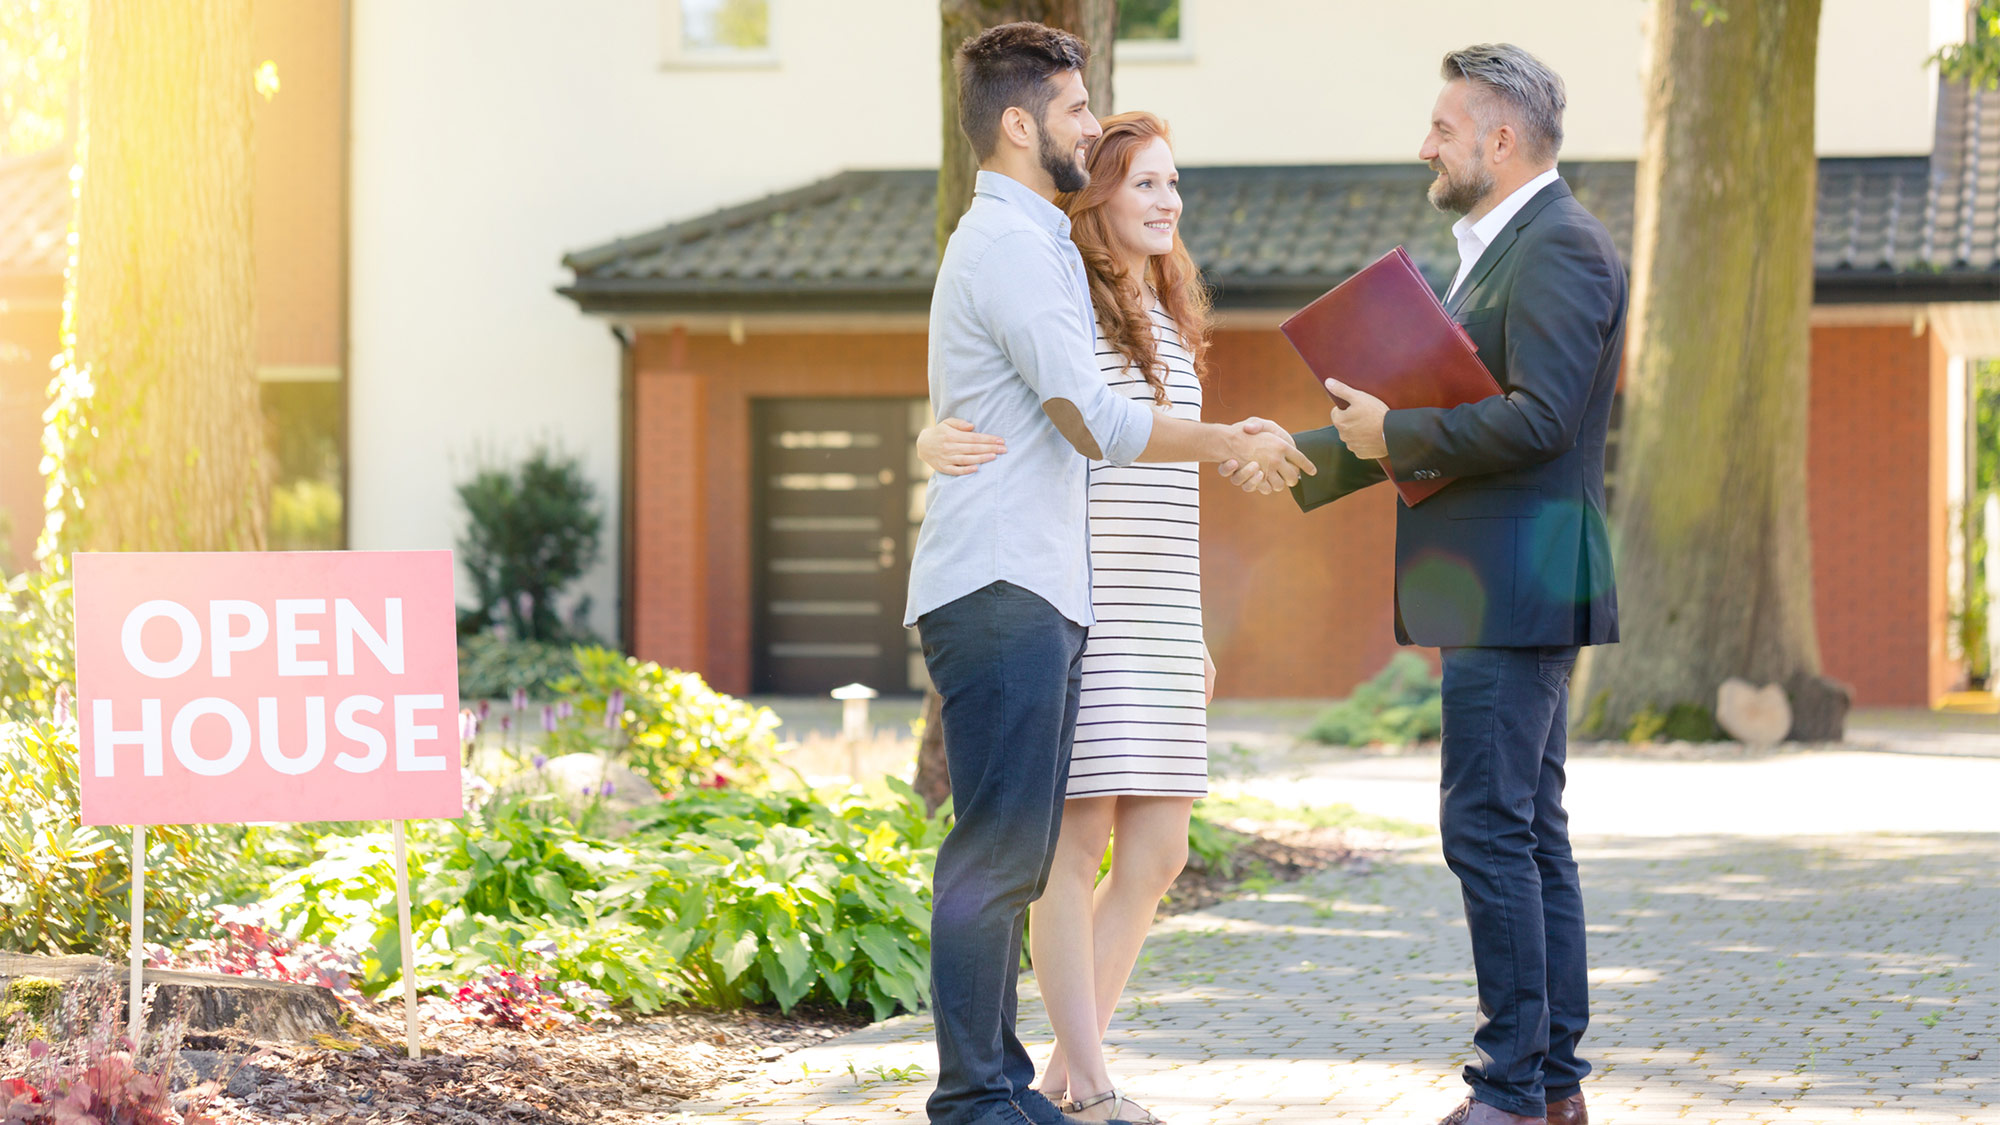 Knowing The Function Of A Broker In A Real Estate Transaction